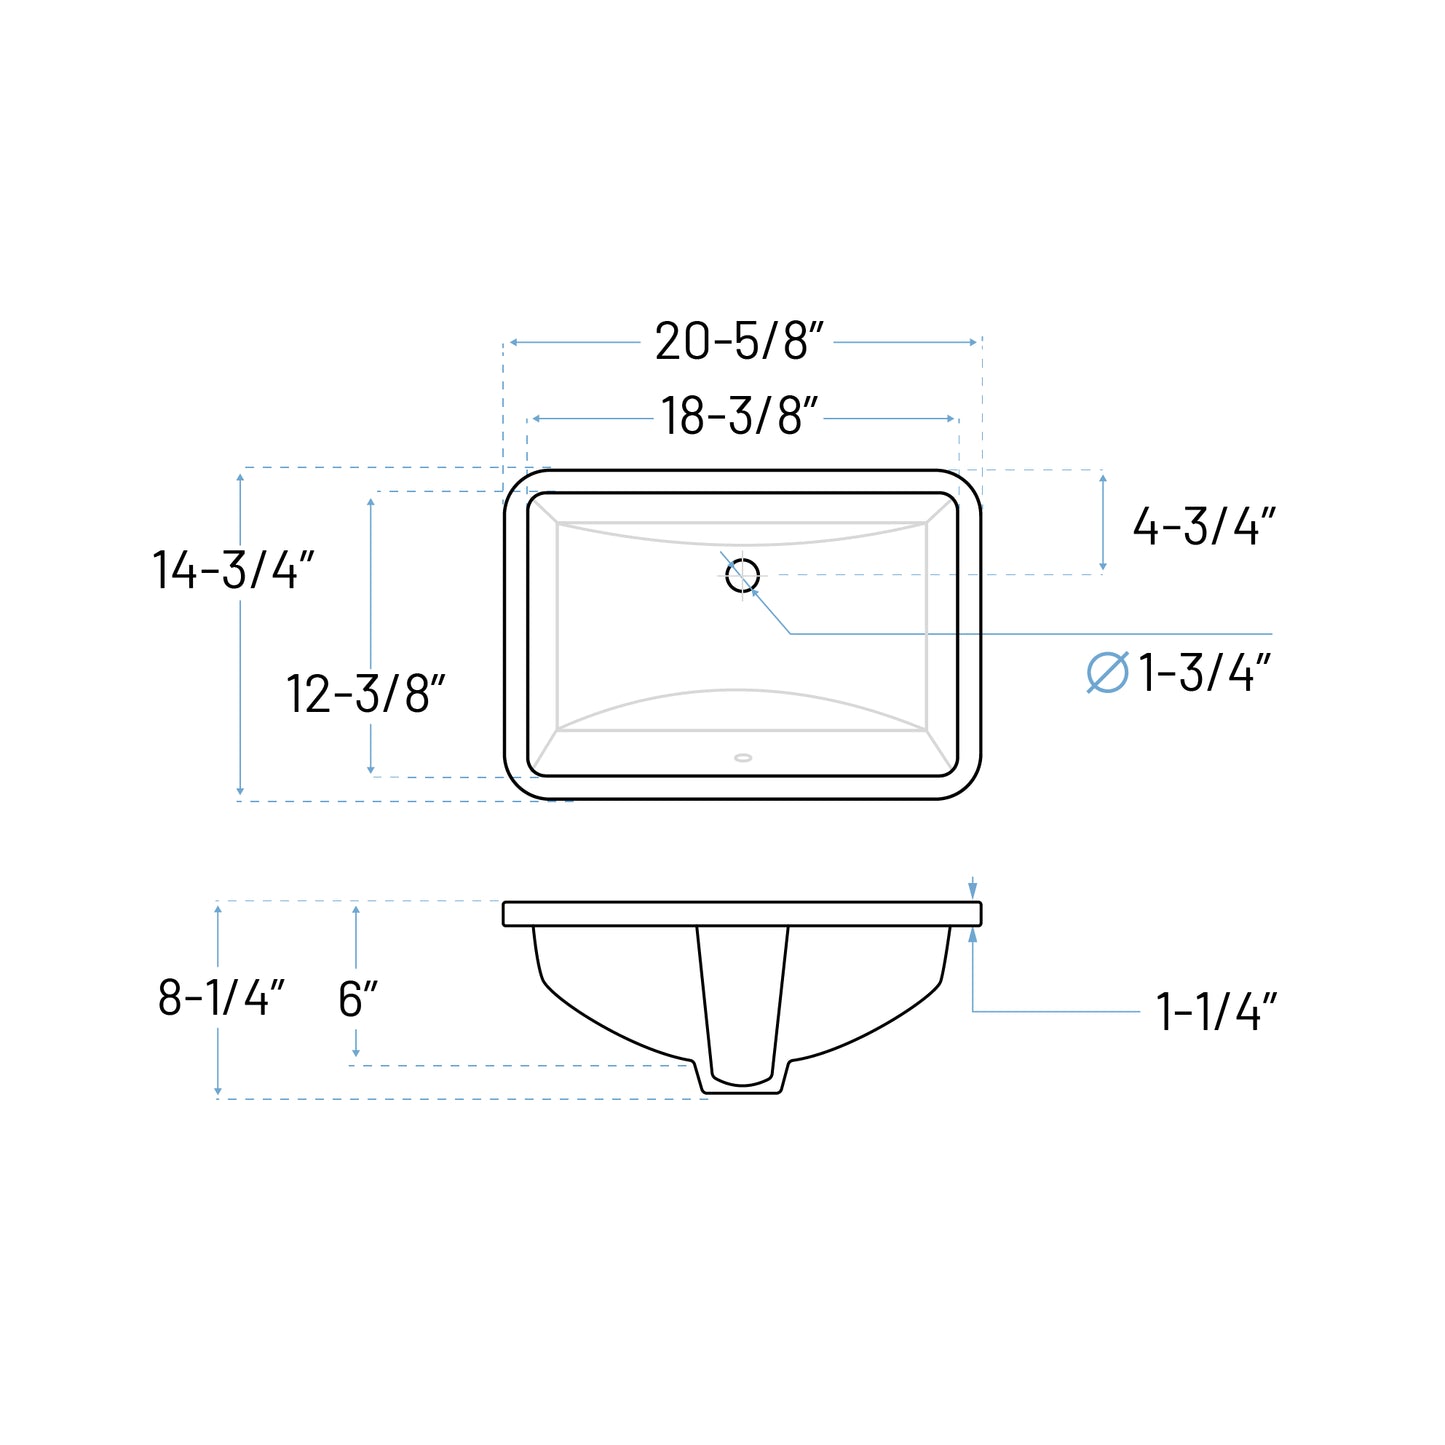 Technical Drawing of An undermount porcelain bathroom sink